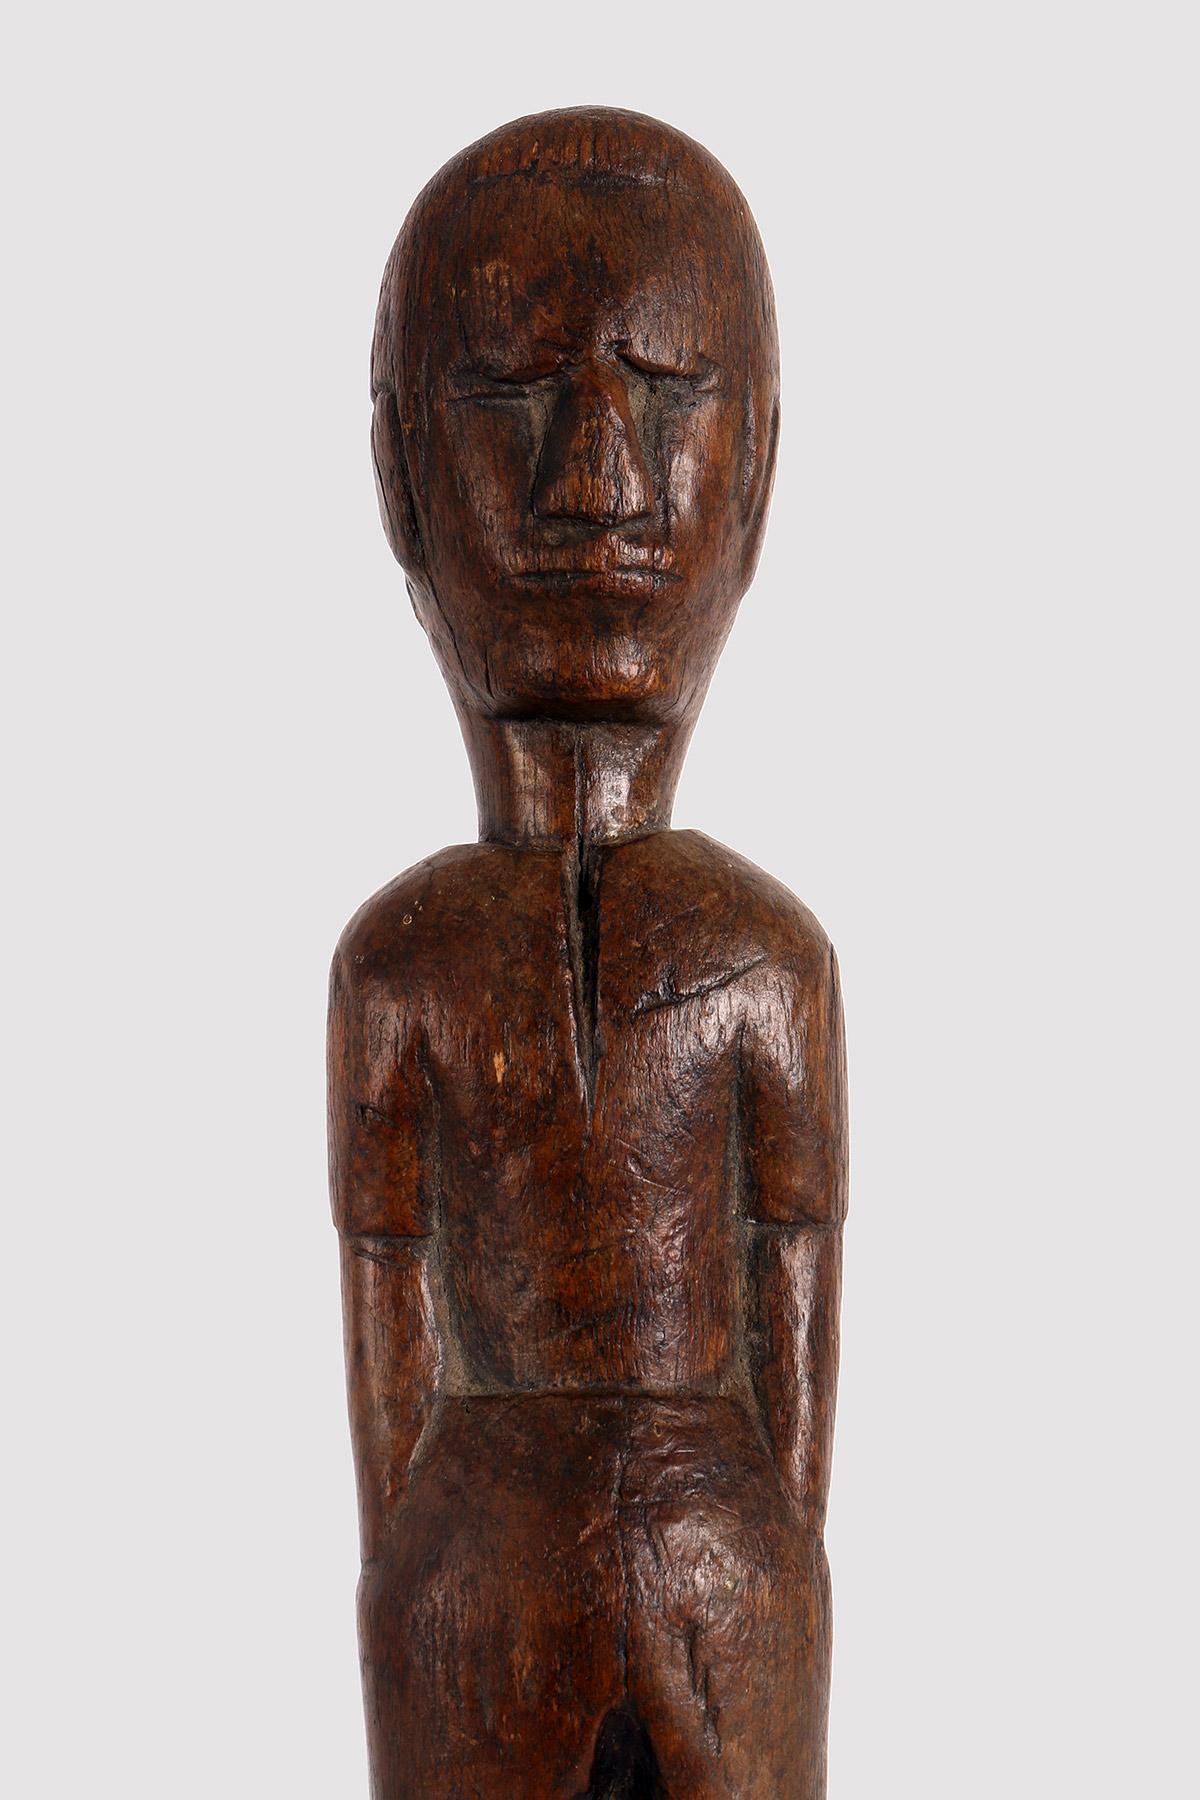 Fruit wood sculpture, Folk Art, depicting a man standing with his hands in his pockets. United States, second half of the 19th century.